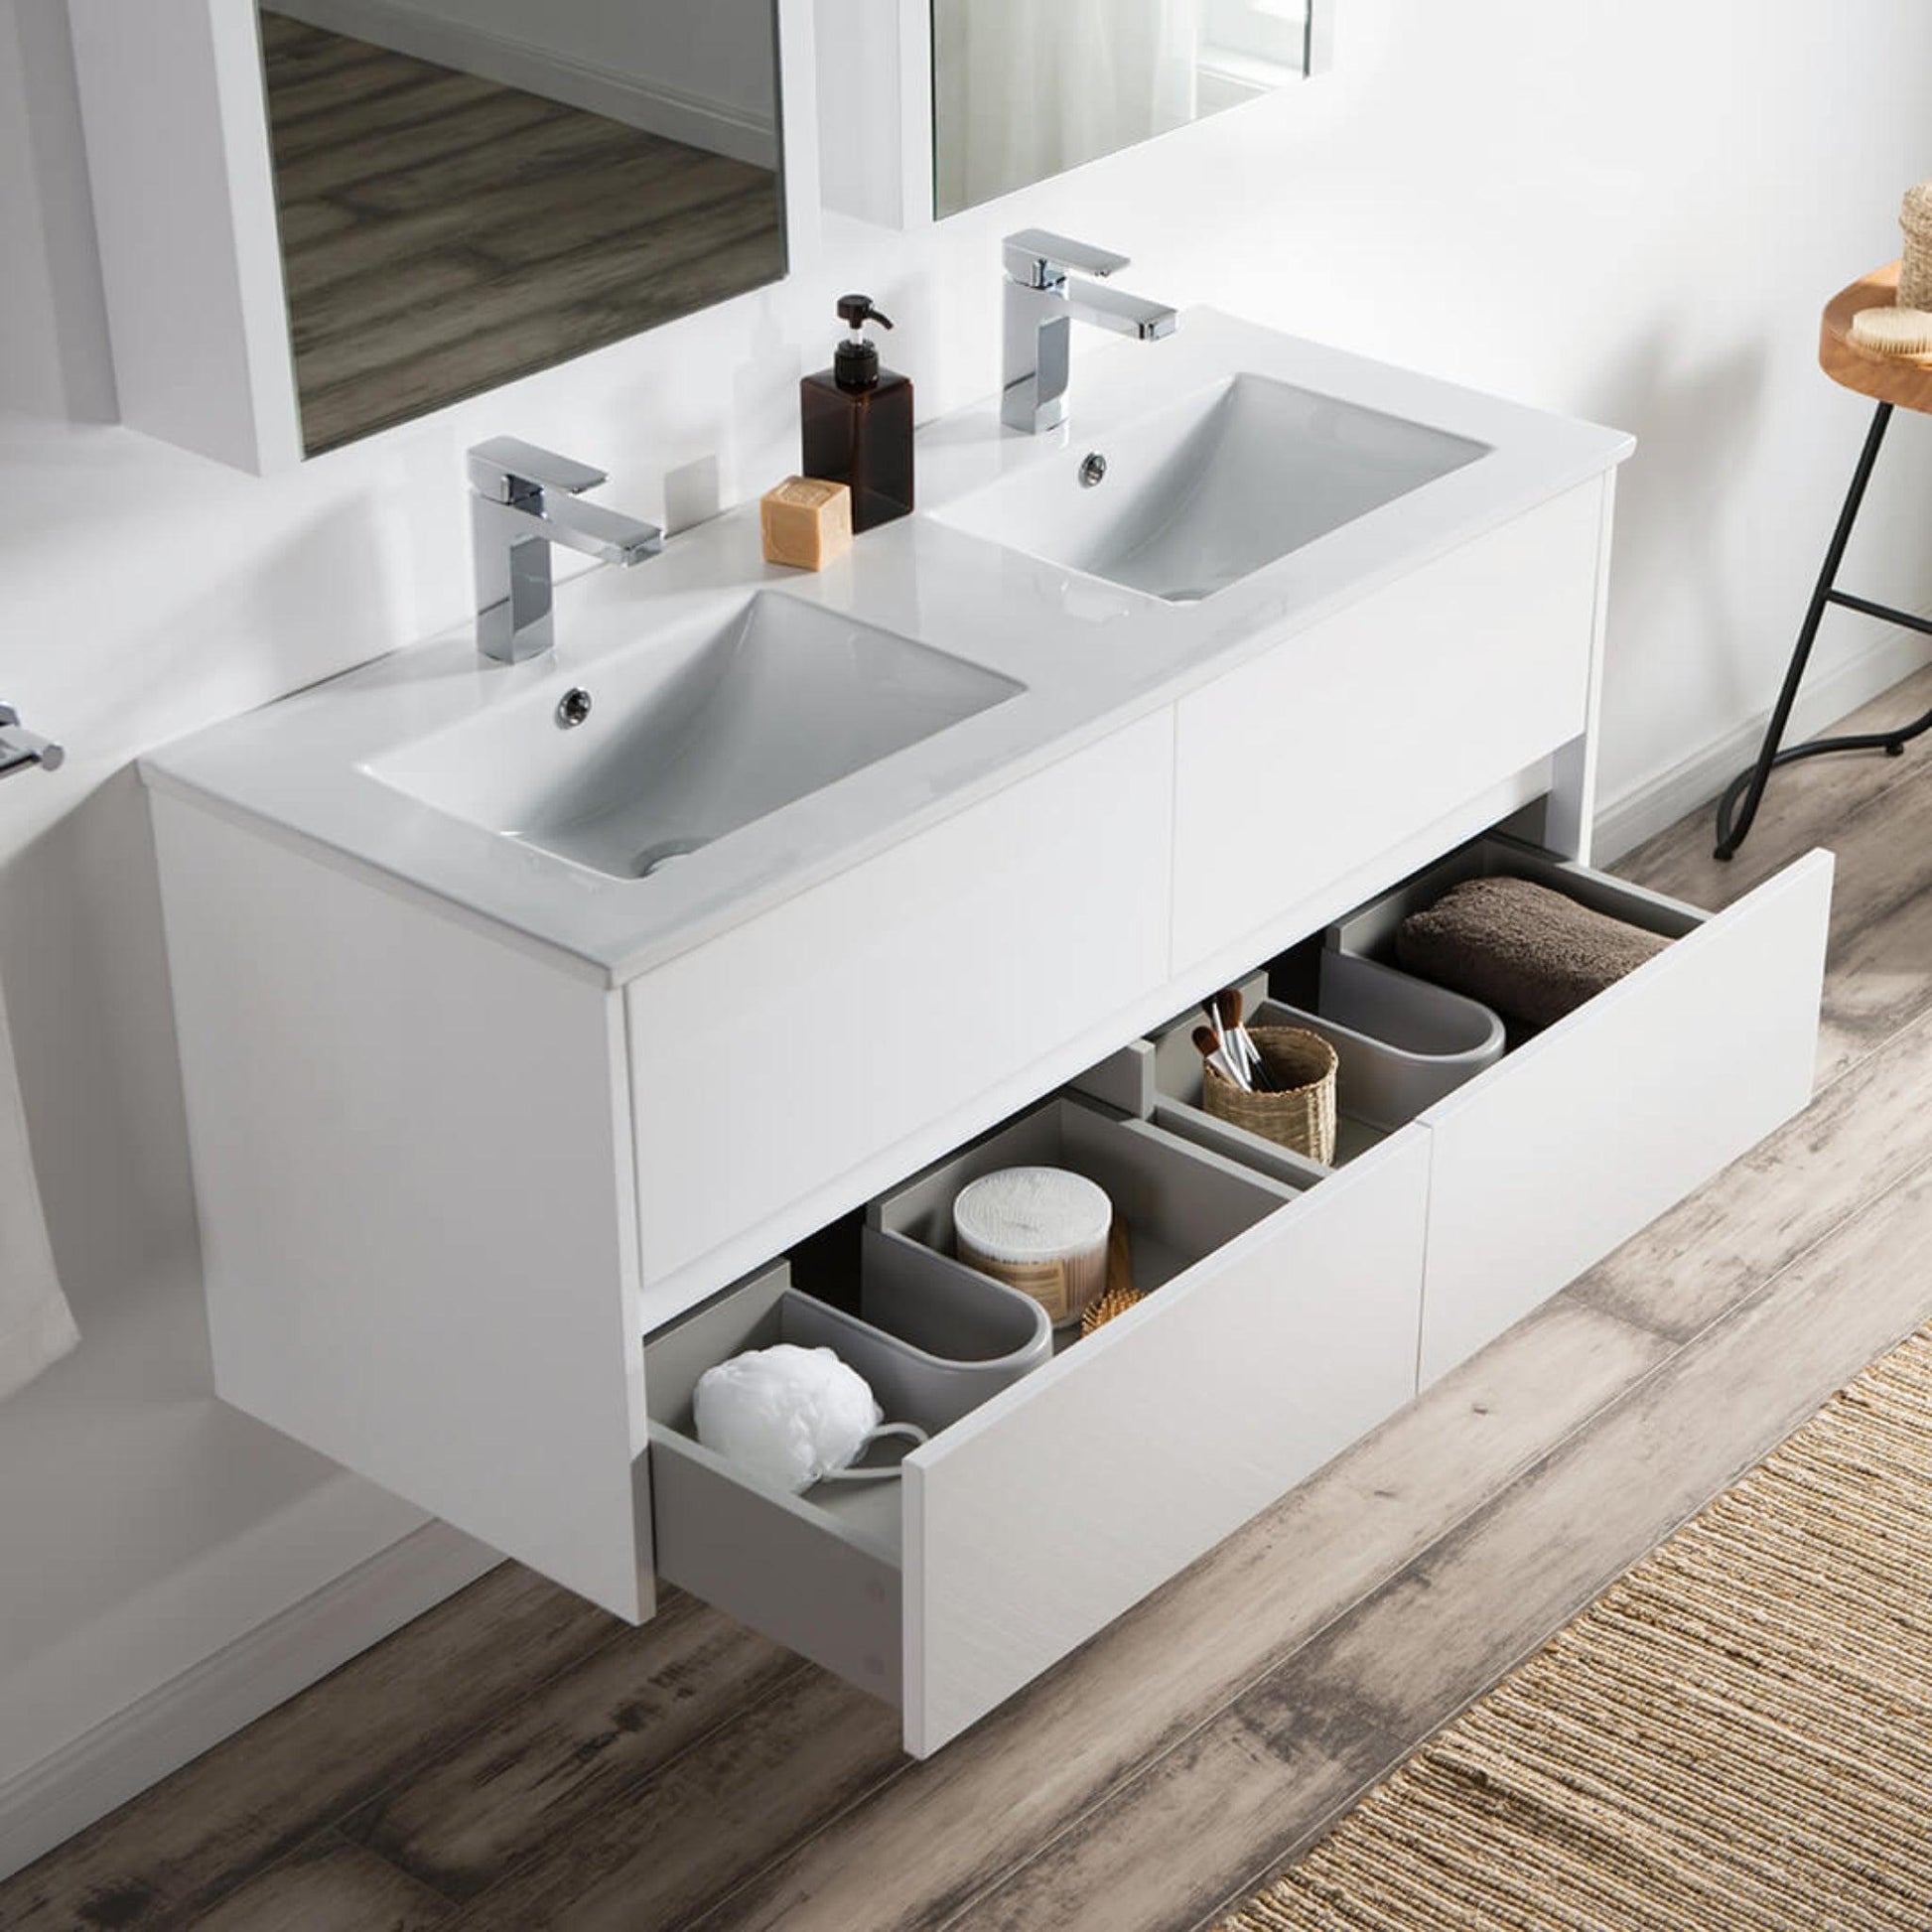 Blossom Valencia 48" 2-Drawer White Wall-Mounted Vanity Set With Ceramic Top and Integrated Single Sink